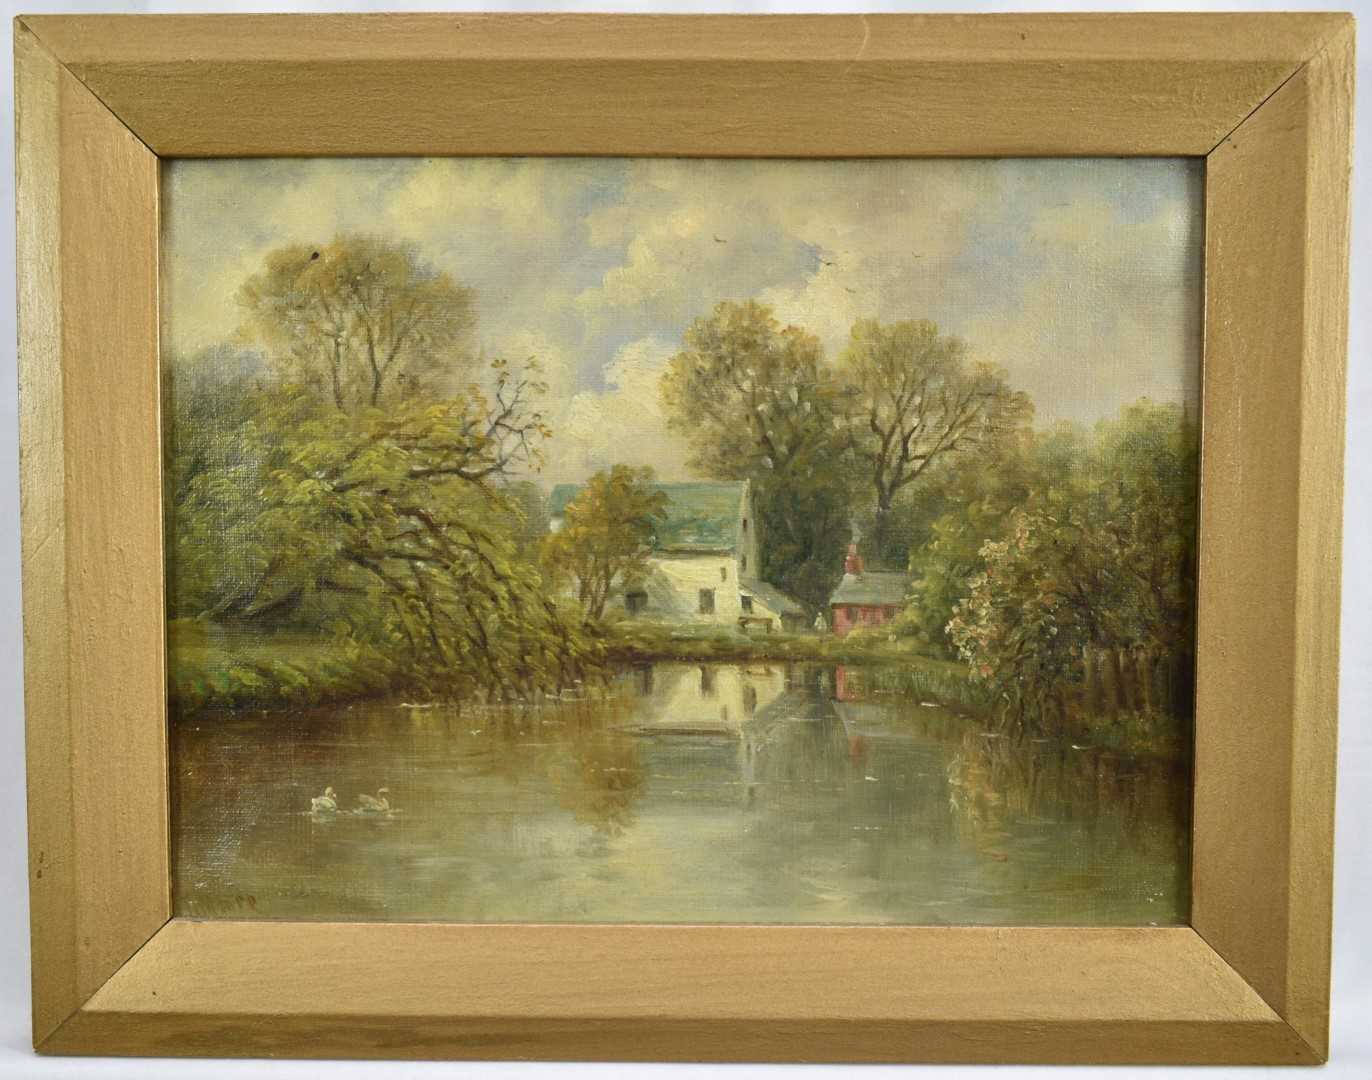 Lot 914 - John Moore of Ipswich (1820-1902) oil on canvas - Lexden Mill, signed, in gilt frame 
Provenance: in the same family ownership since painted